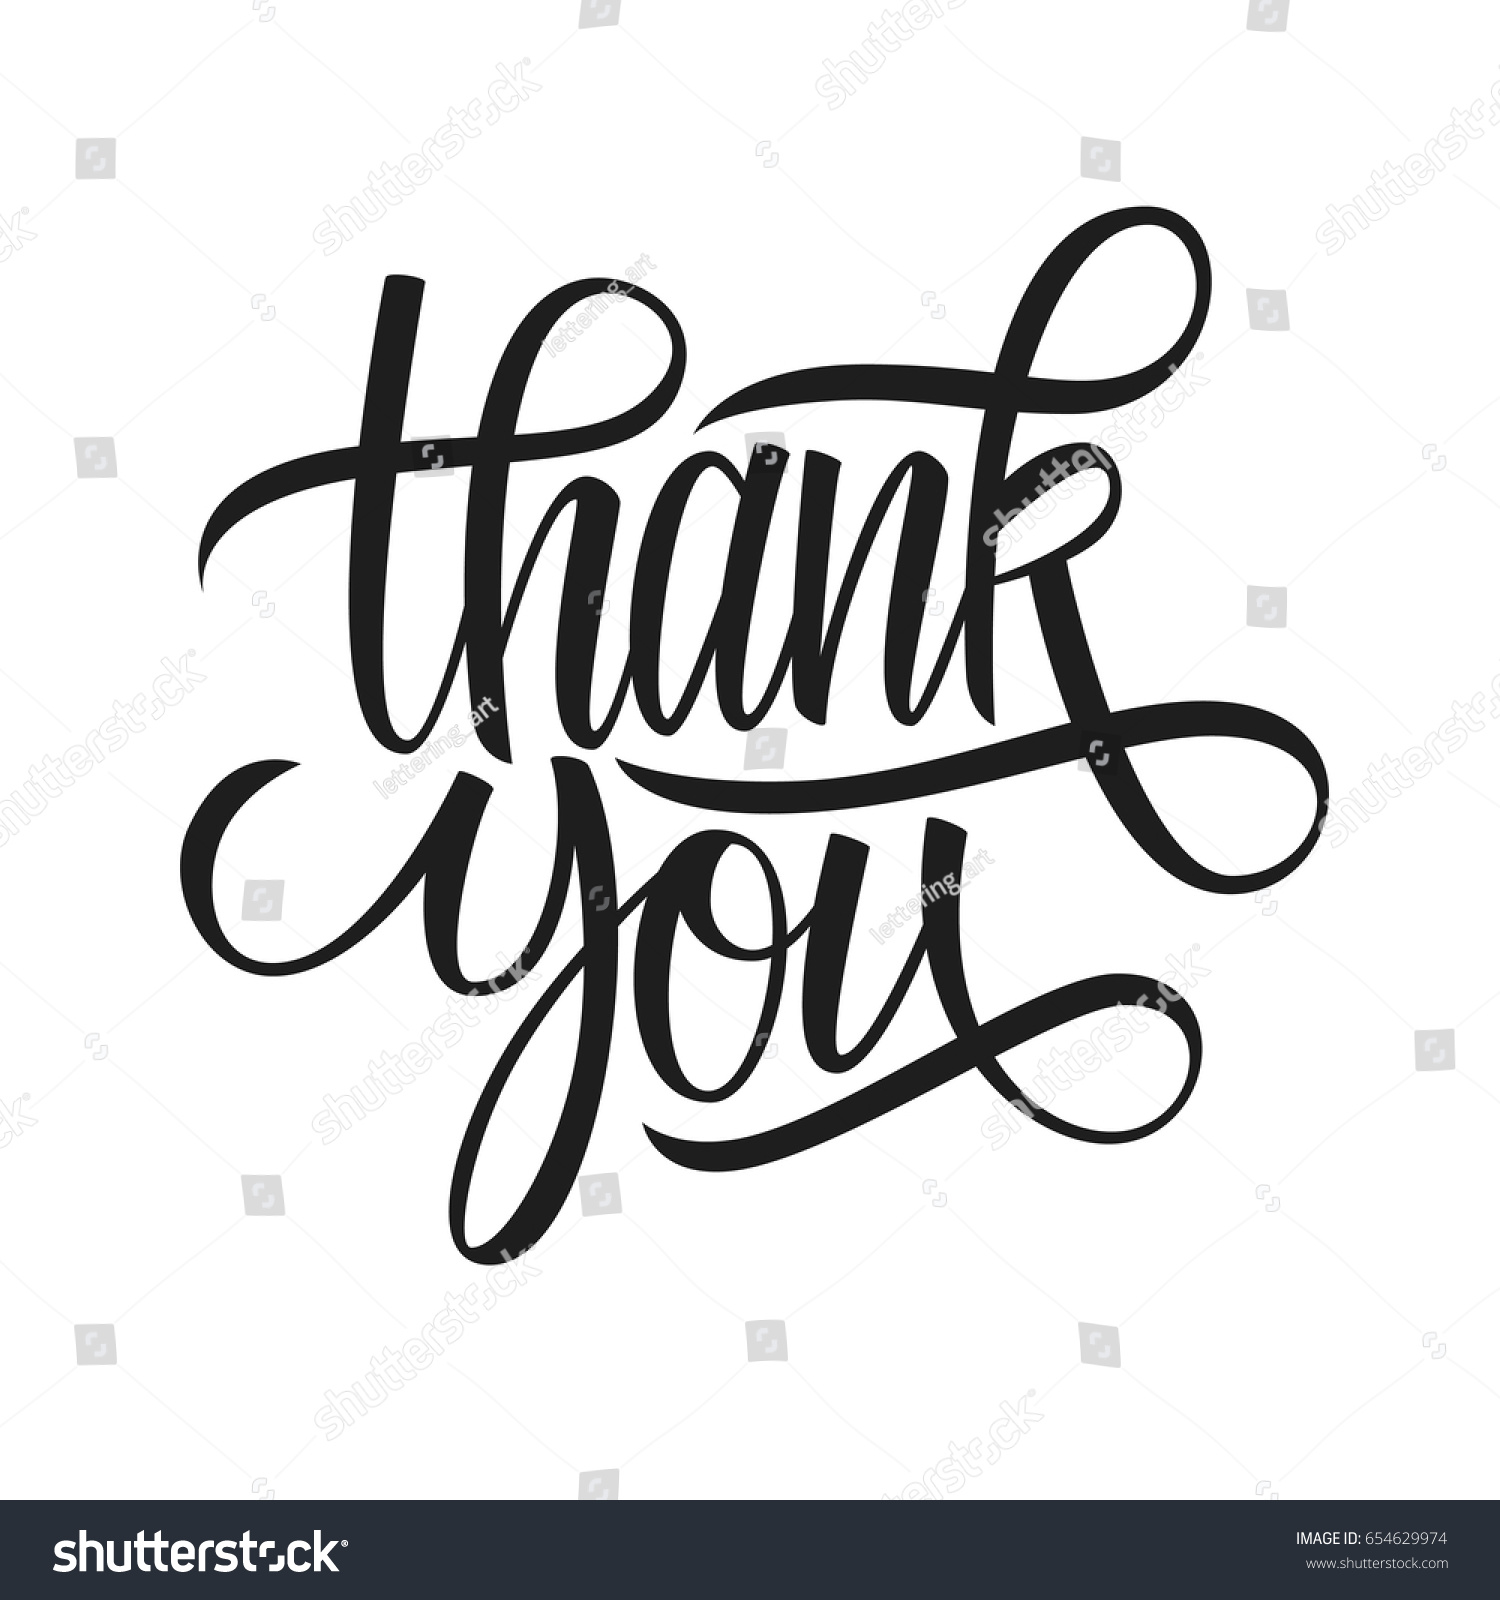 Thank You Hand Lettering Vector Illustration Stock Vector (Royalty Free ...